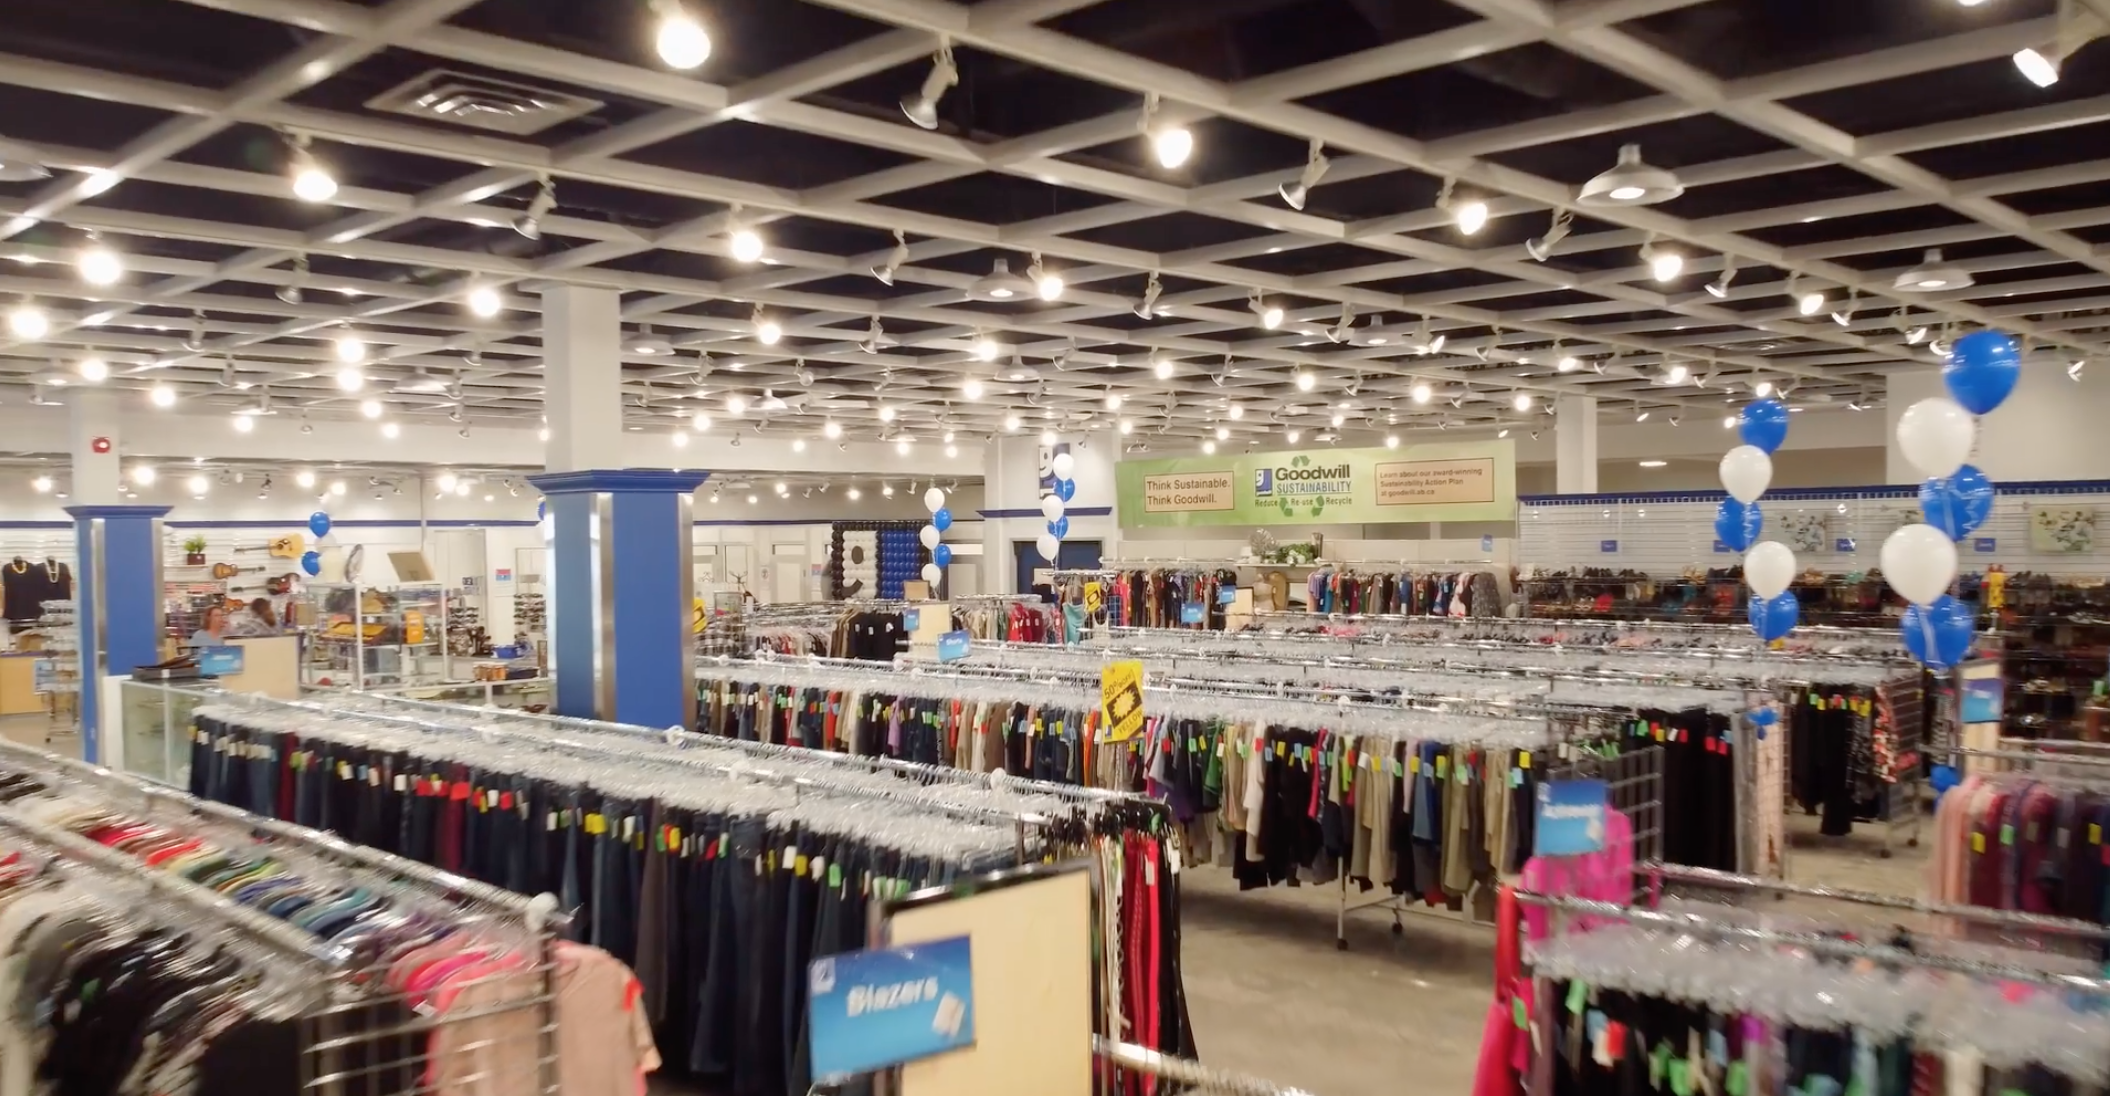 Interior of 9655 Macleod Trail SW Goodwill